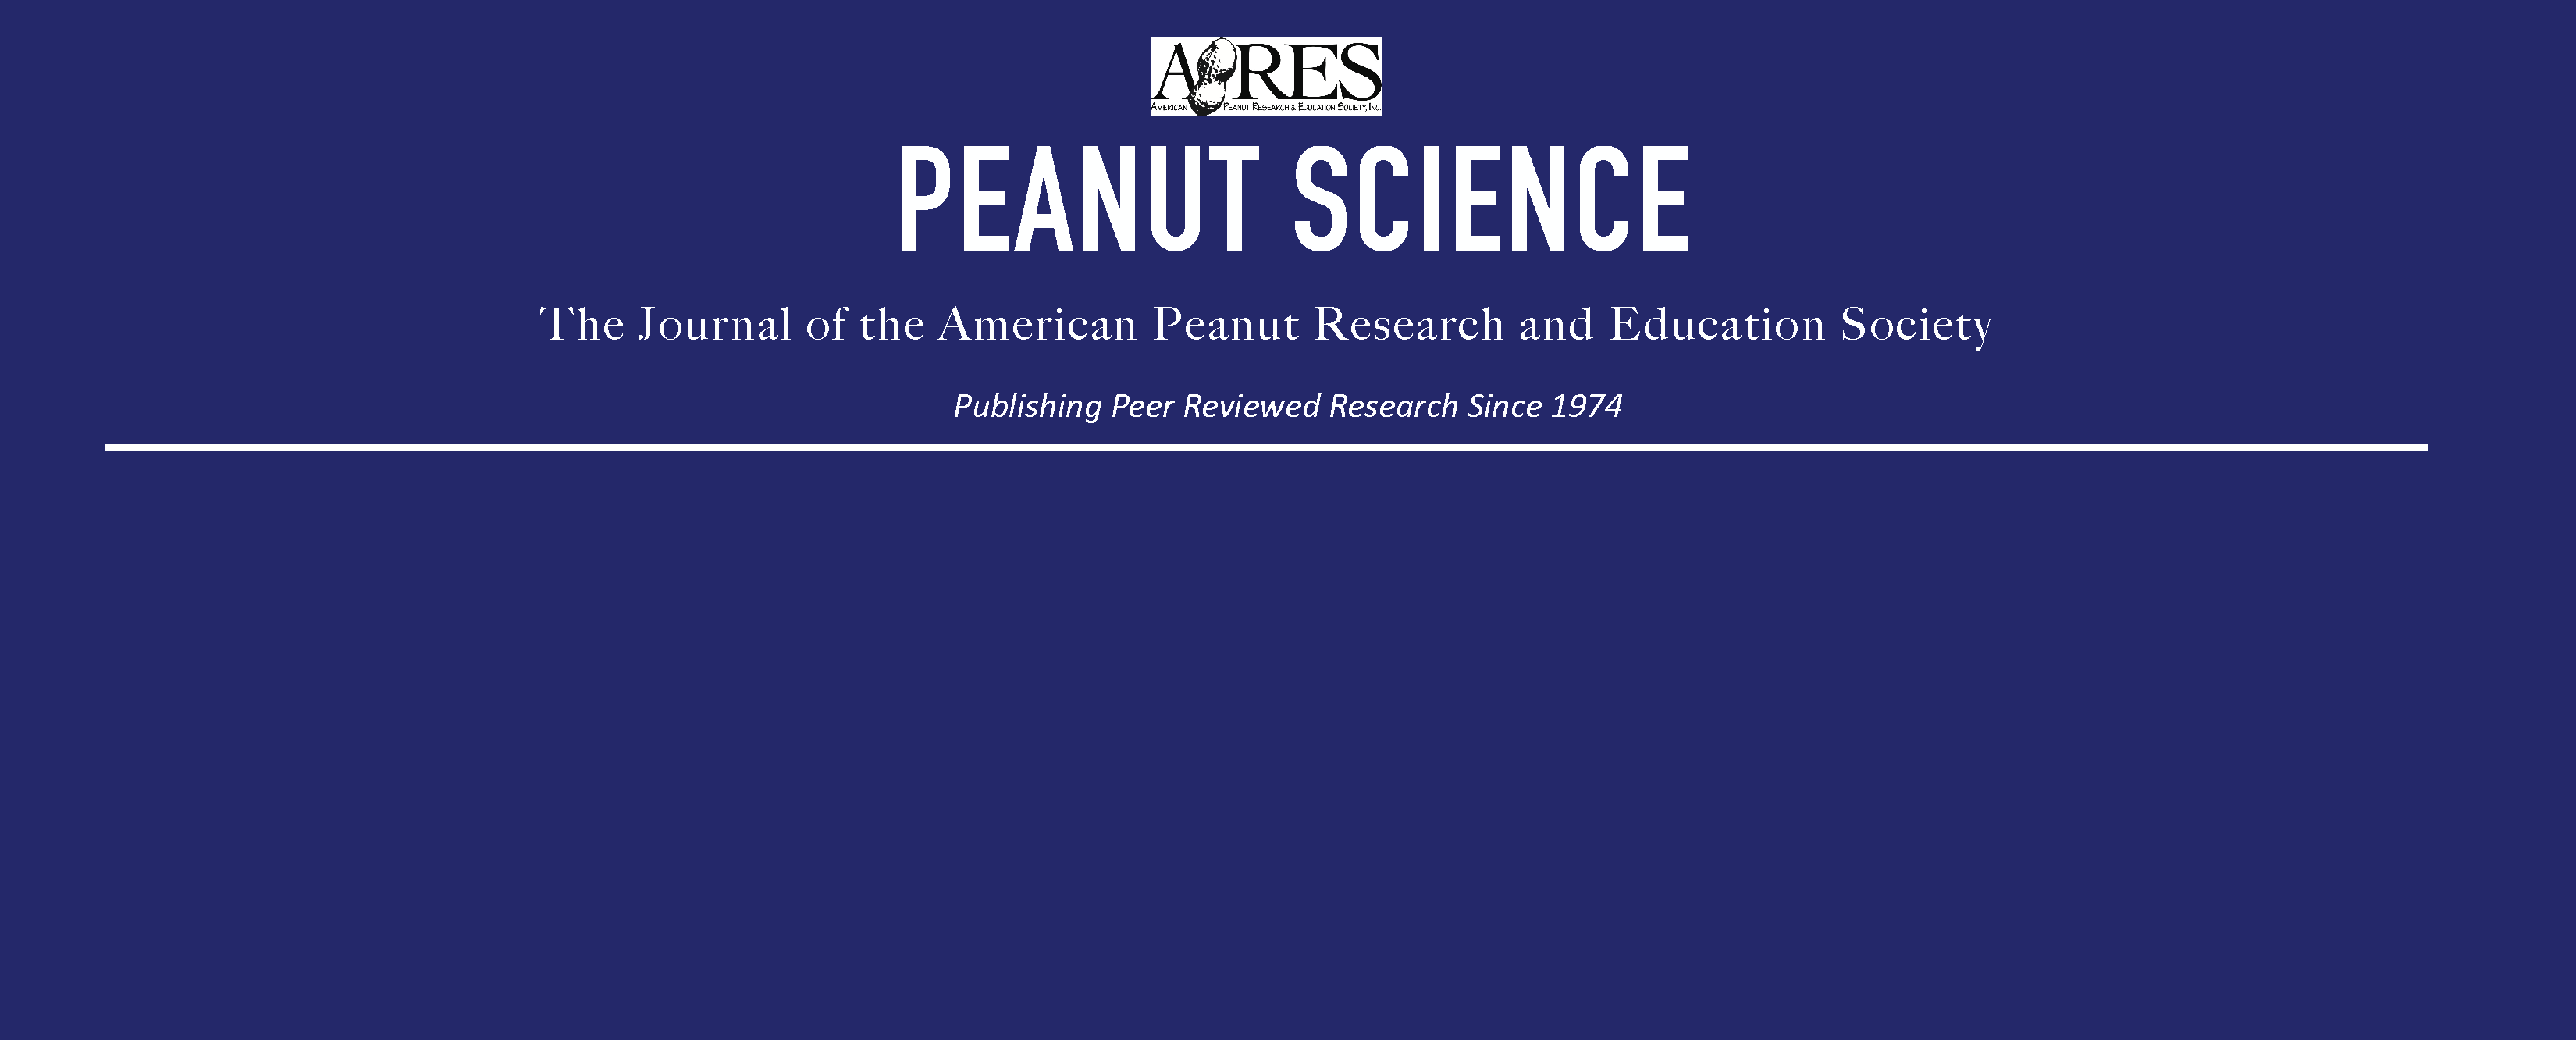 Seed Protein Percentage and Mineral Concentration Variability and Their Correlation with Other Seed Quality Traits in the U.S. Peanut Mini-Core Collection